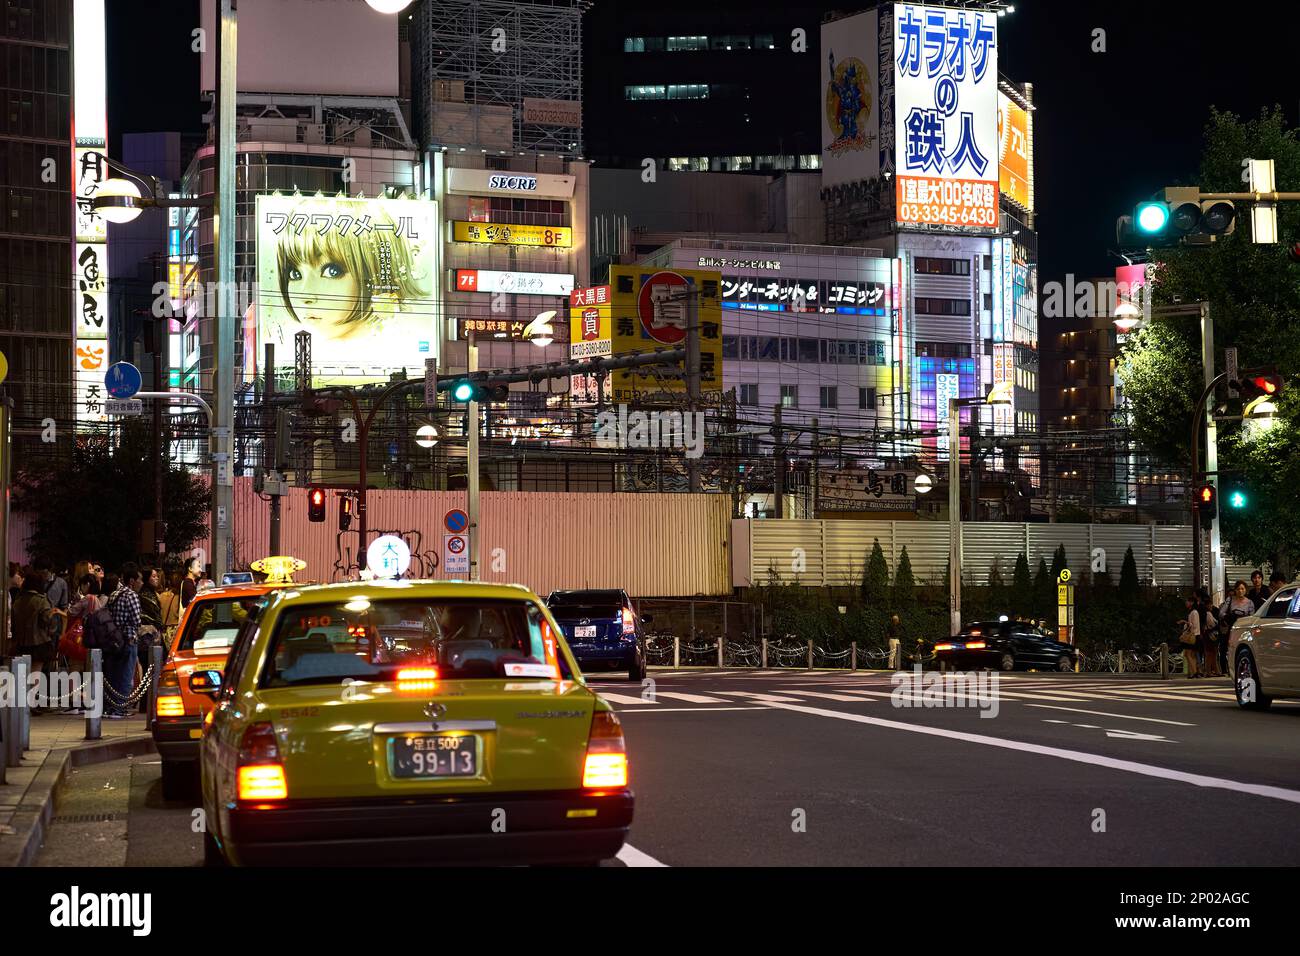 Japanese taxis waiting near a white zebra crossing with large neon advertising billboards on the surrounding buildings in Tokyo, Japan Stock Photo